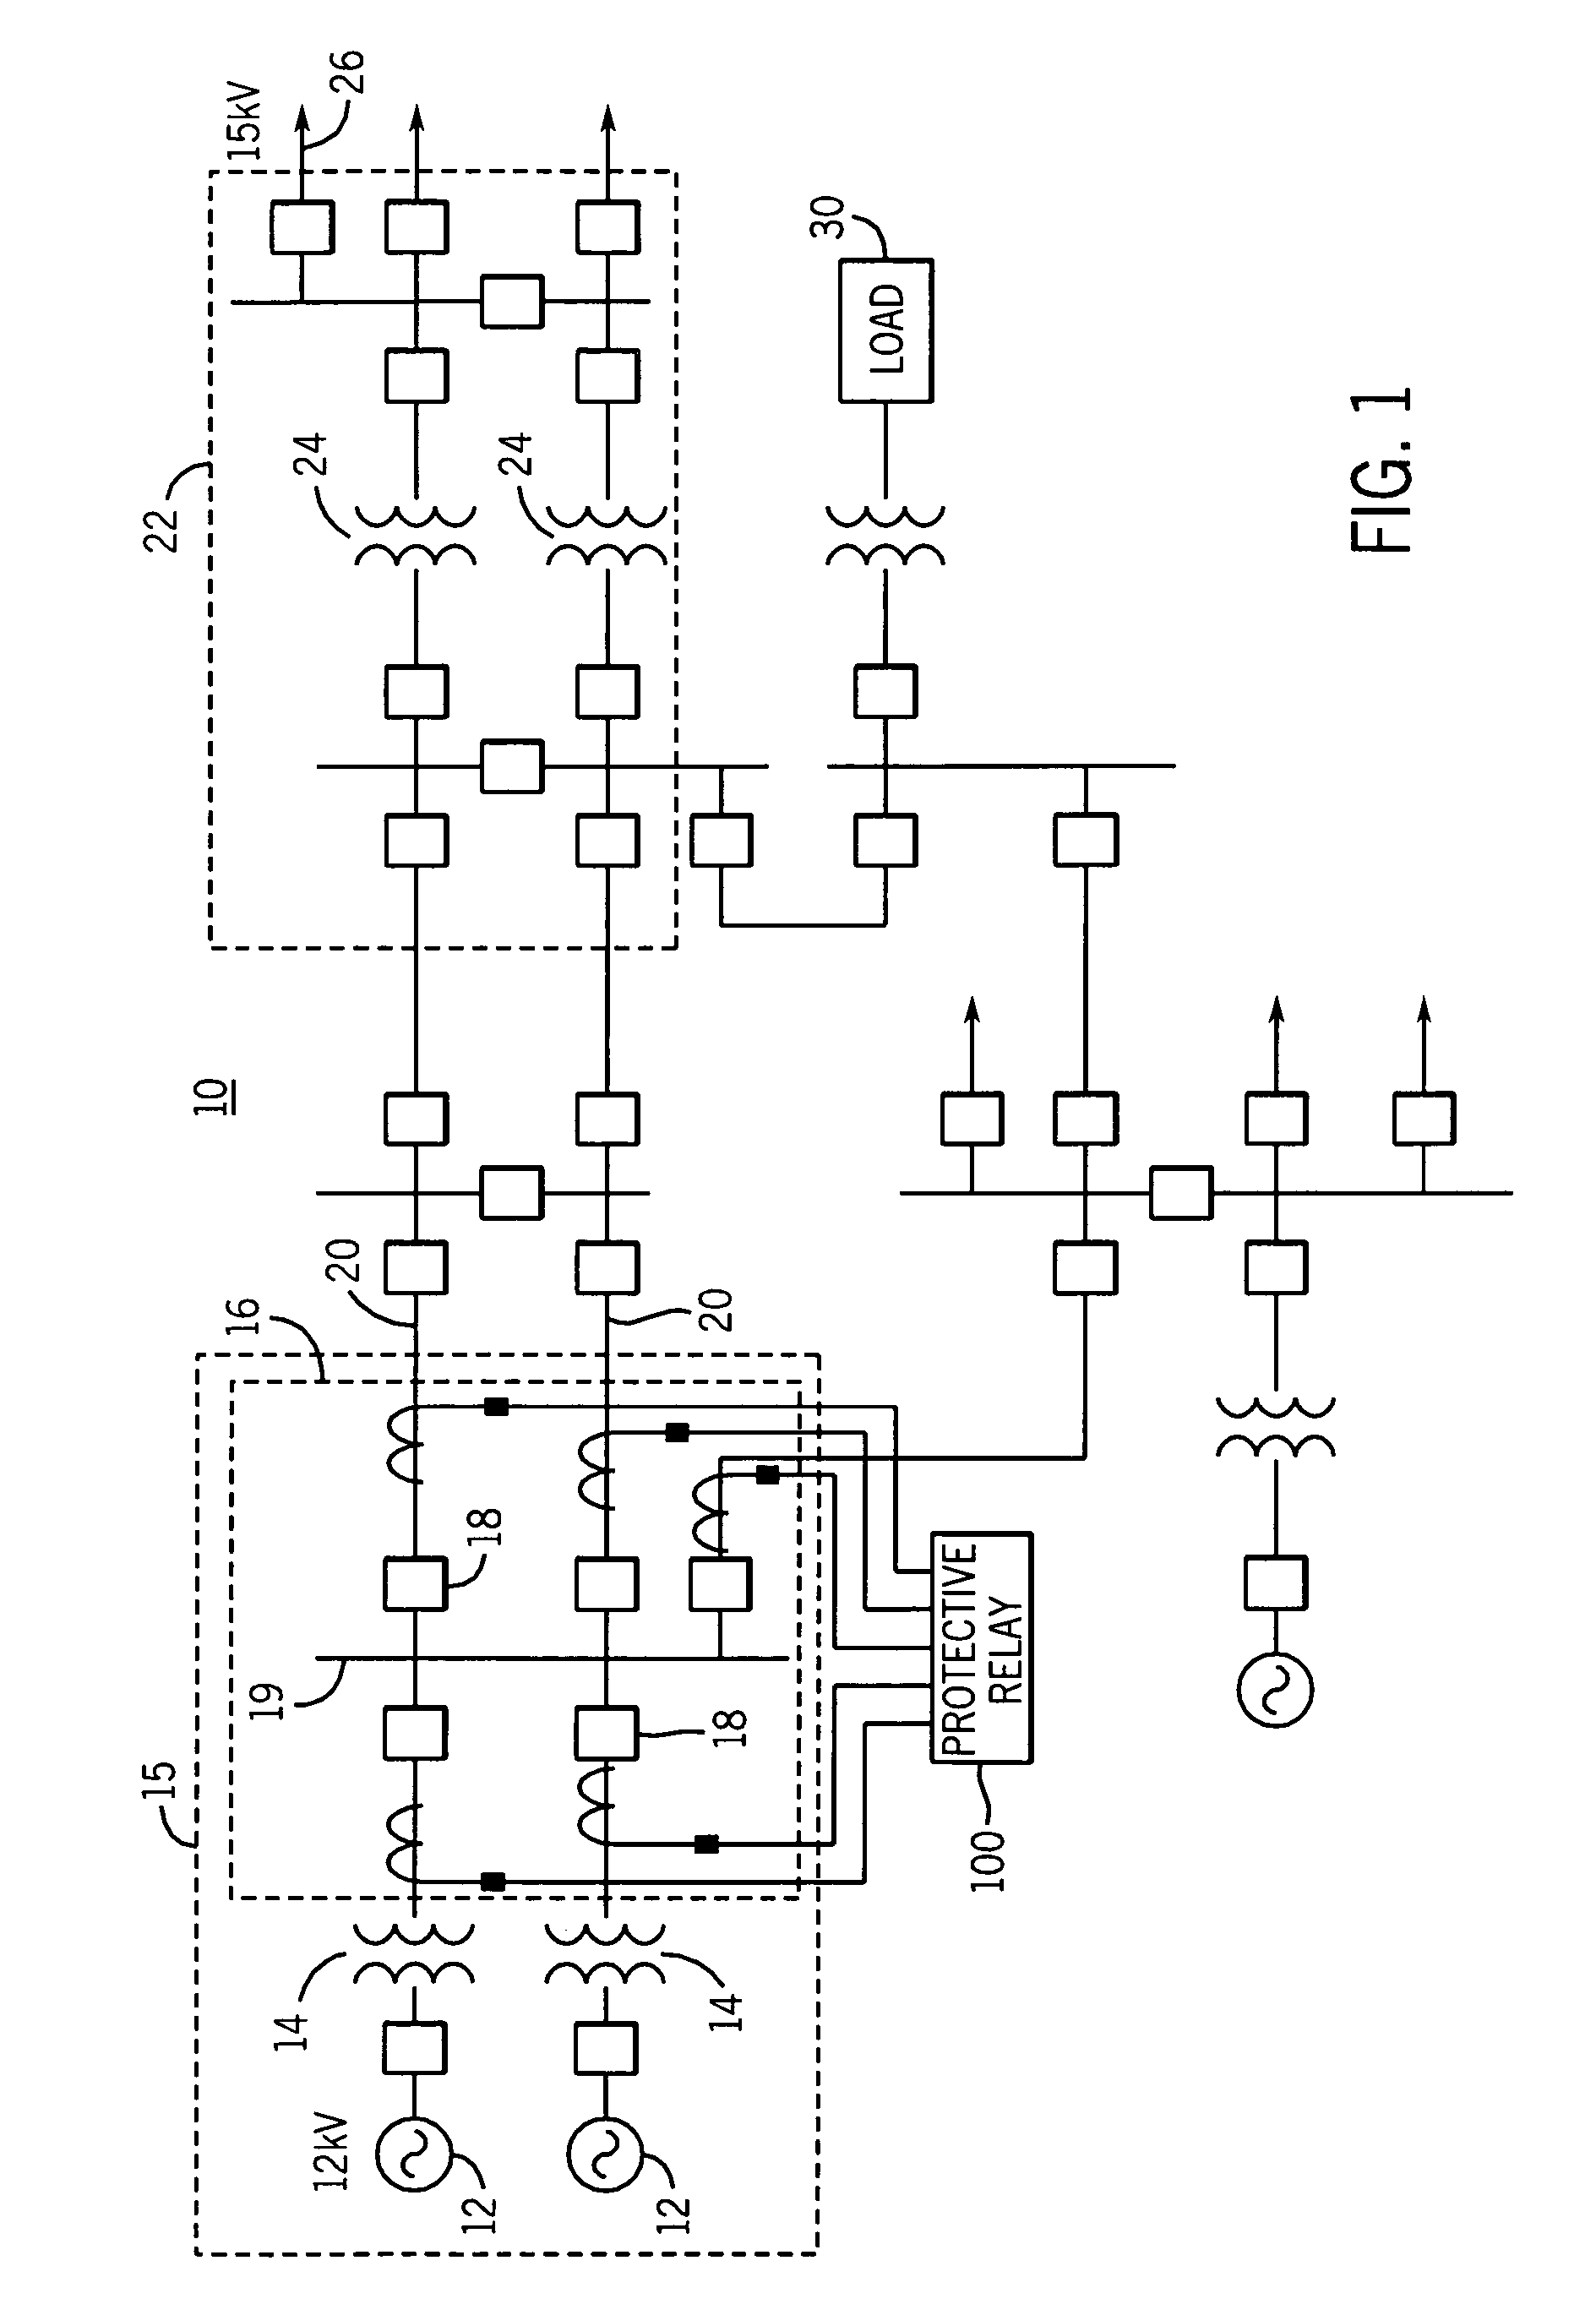 Apparatus and method for identifying a loss of a current transformer signal in a power system